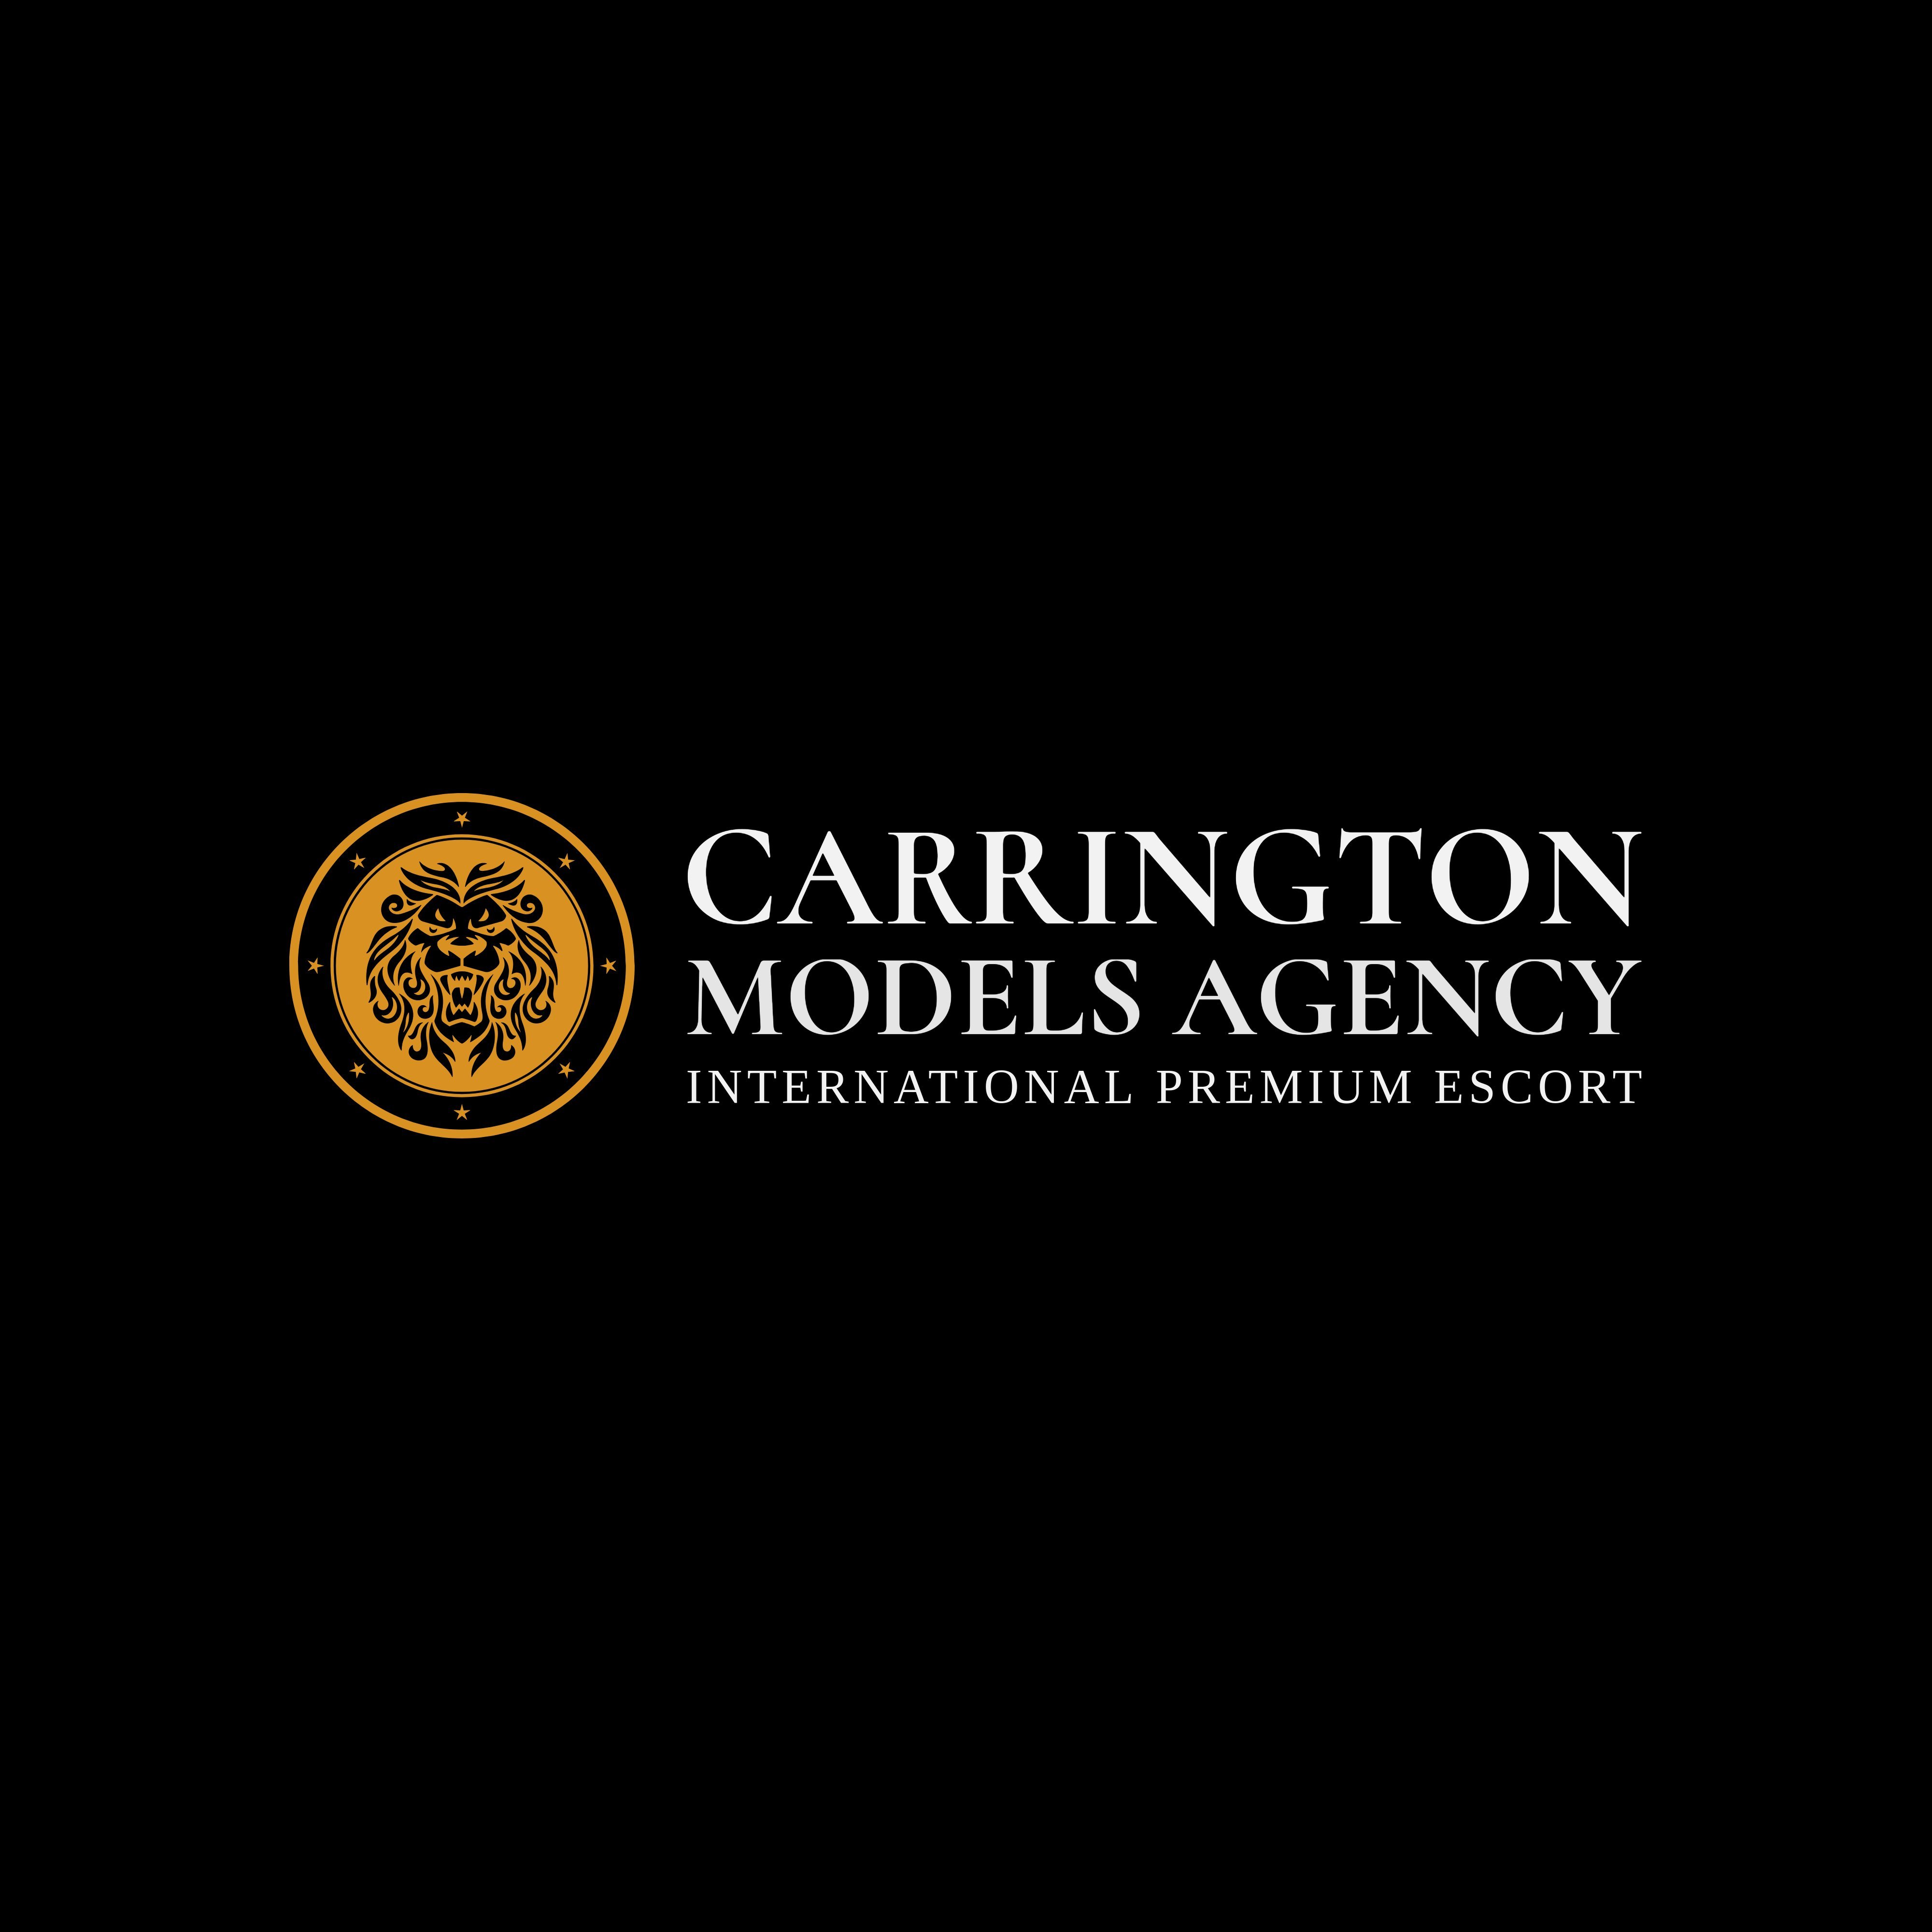 Carrington Models  is a 100% female owned and managed upscale escort agency operating in beautiful London and in some major cities throughout the world.